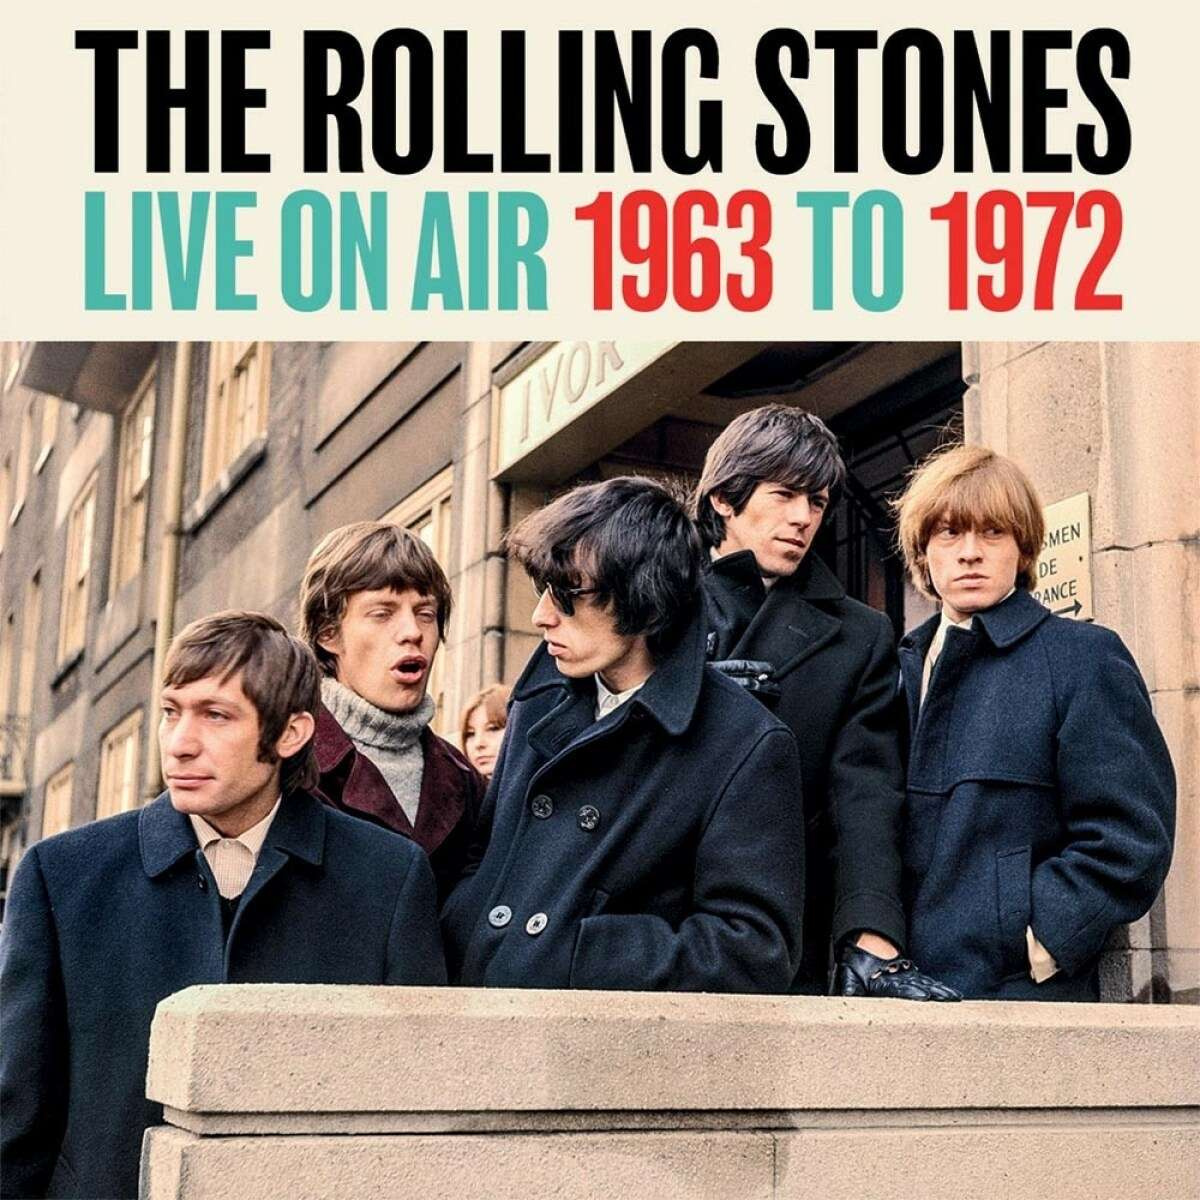 LIVE ON AIR 1963 - 1972